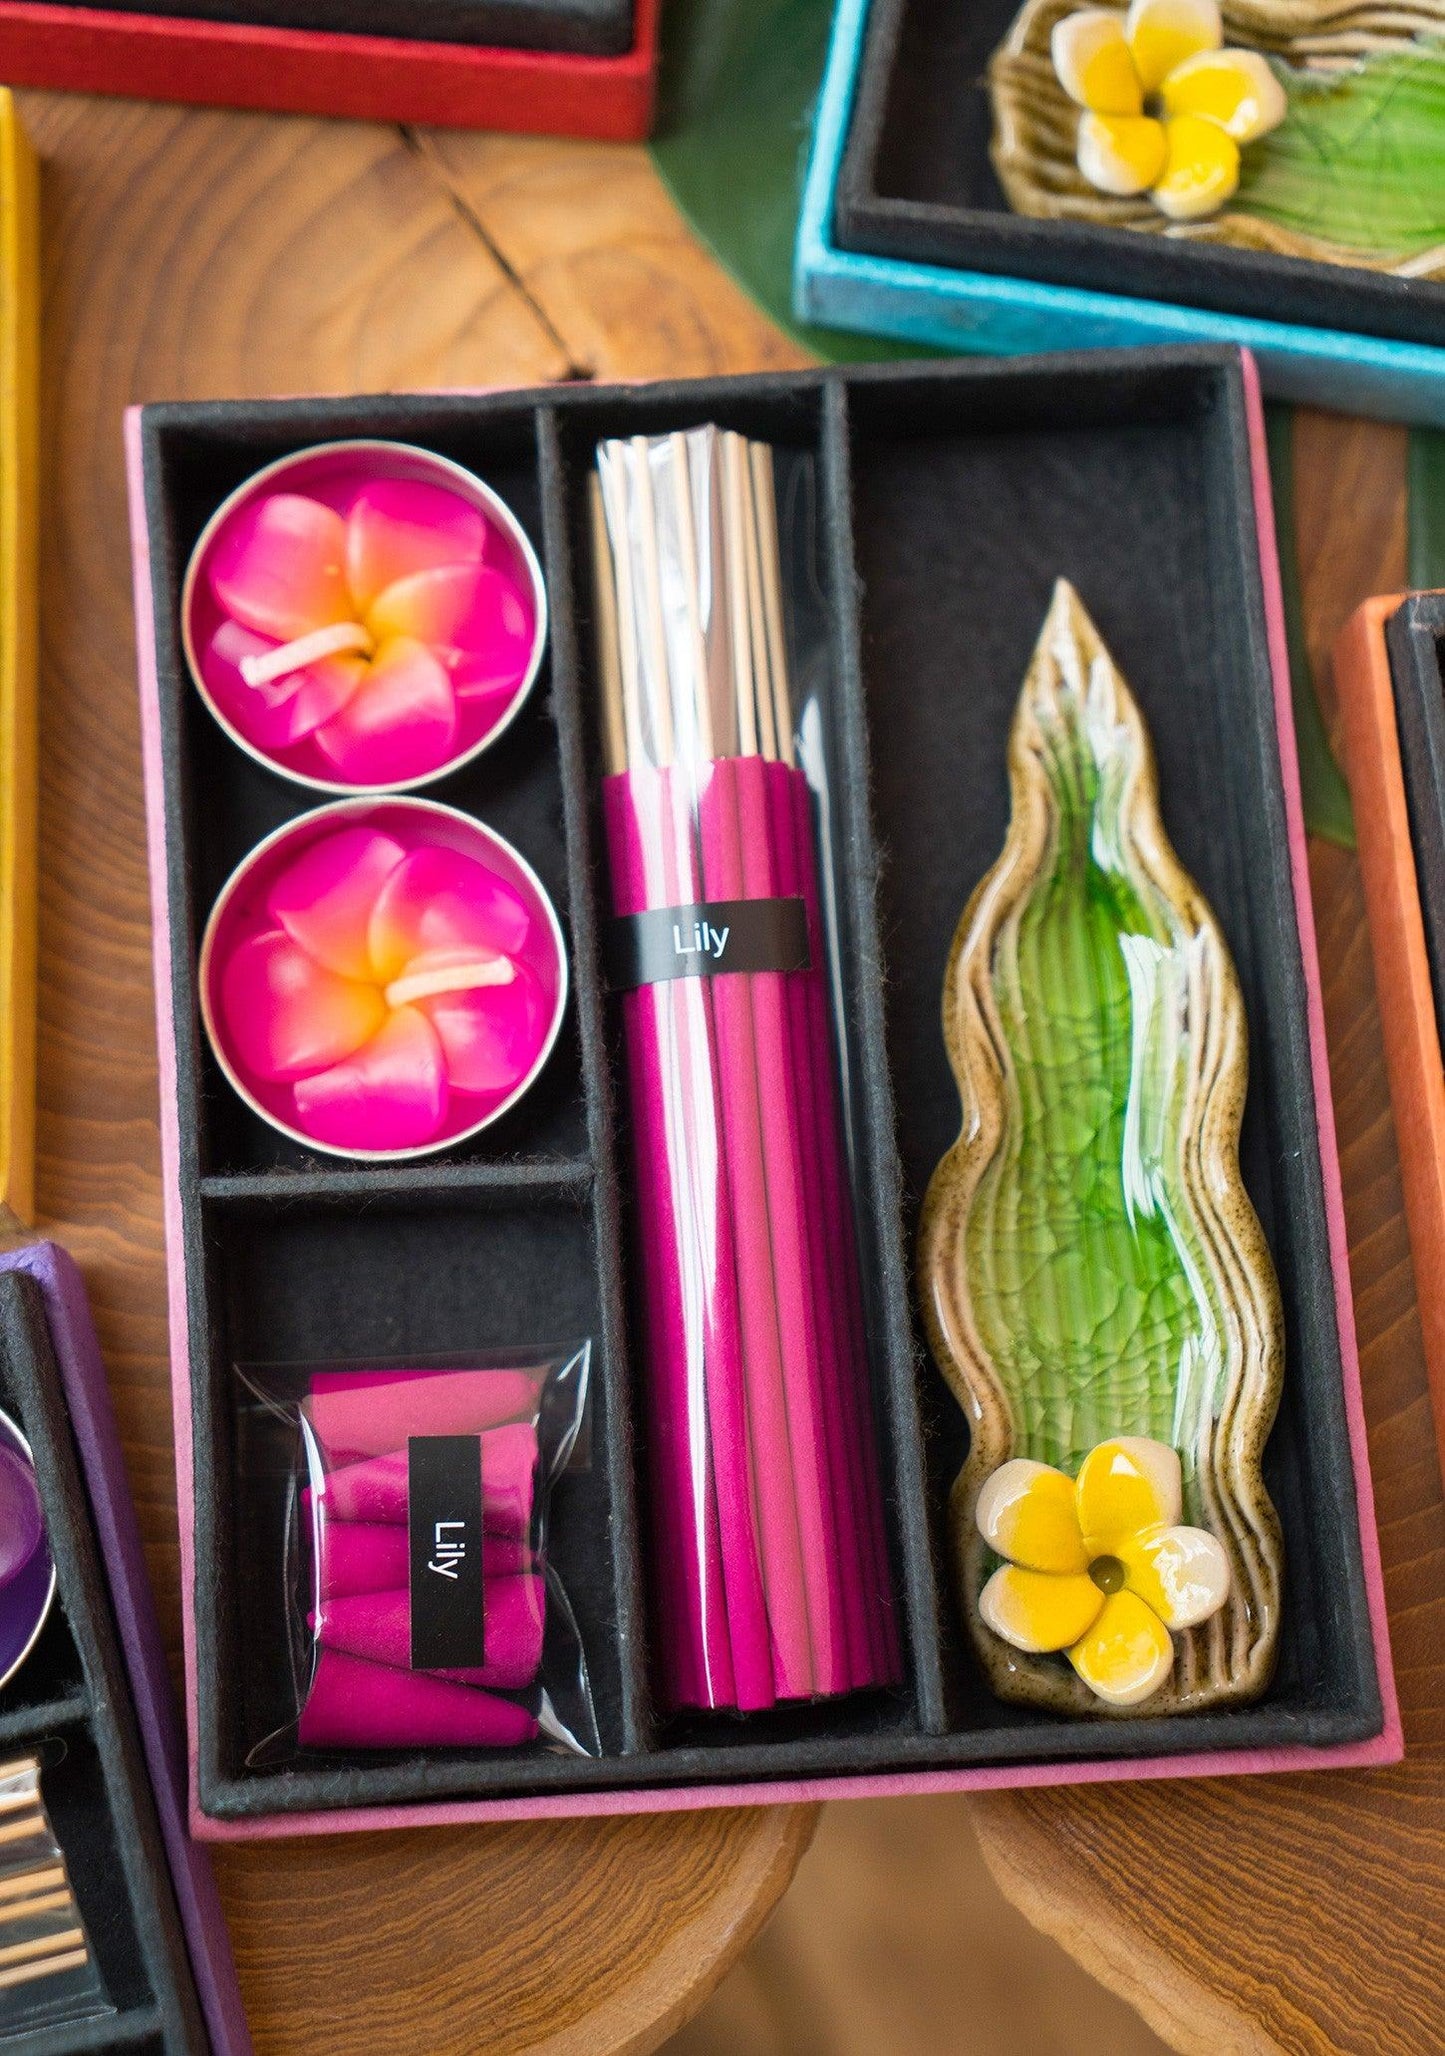 Thai Incense Gift Set With Tealight Candles, Incense Cones & a Holder